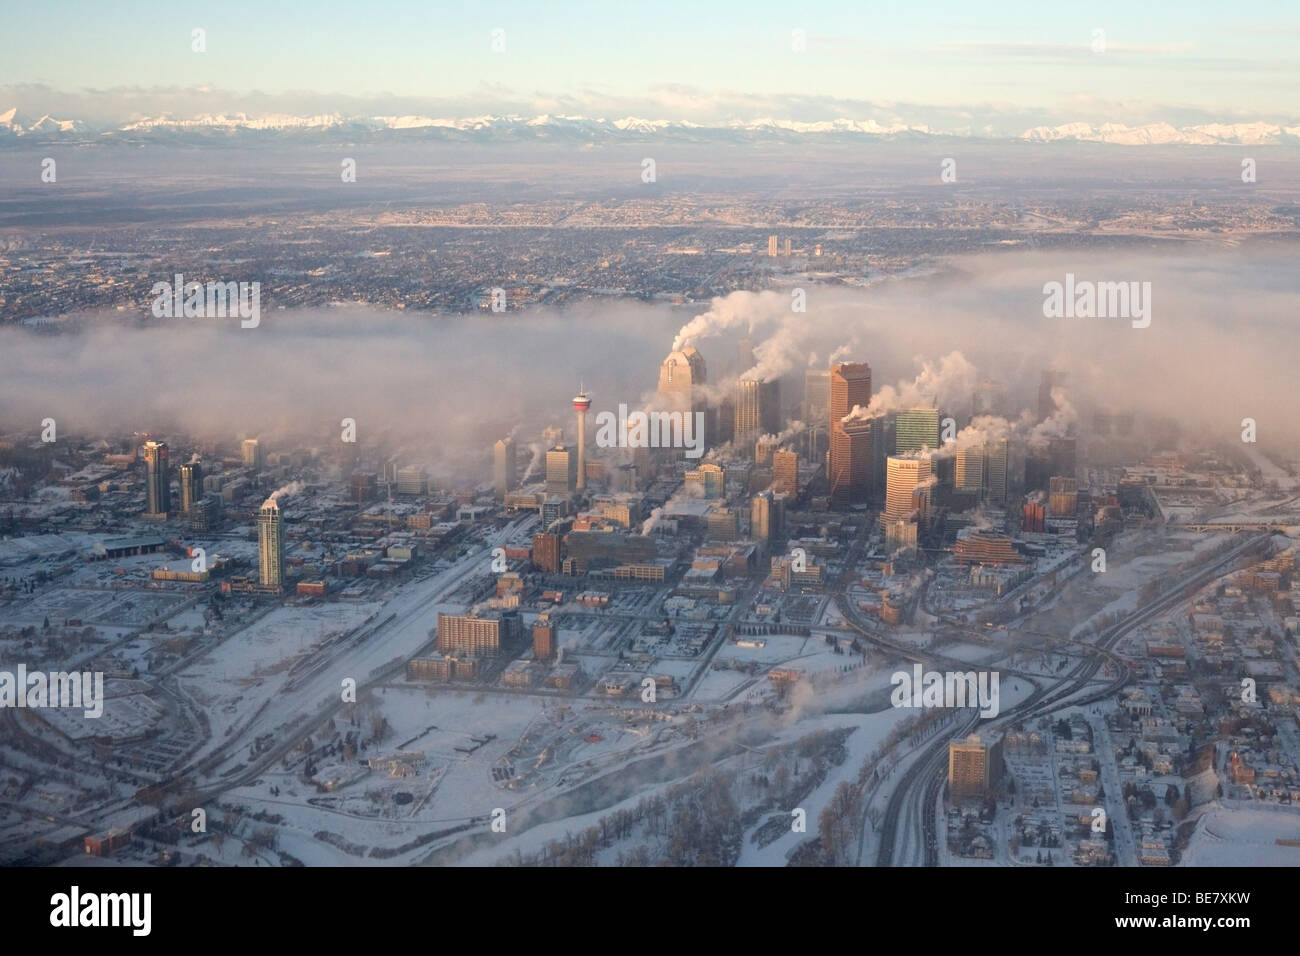 Emissions from downtown buildings in a city during cold weather Stock Photo